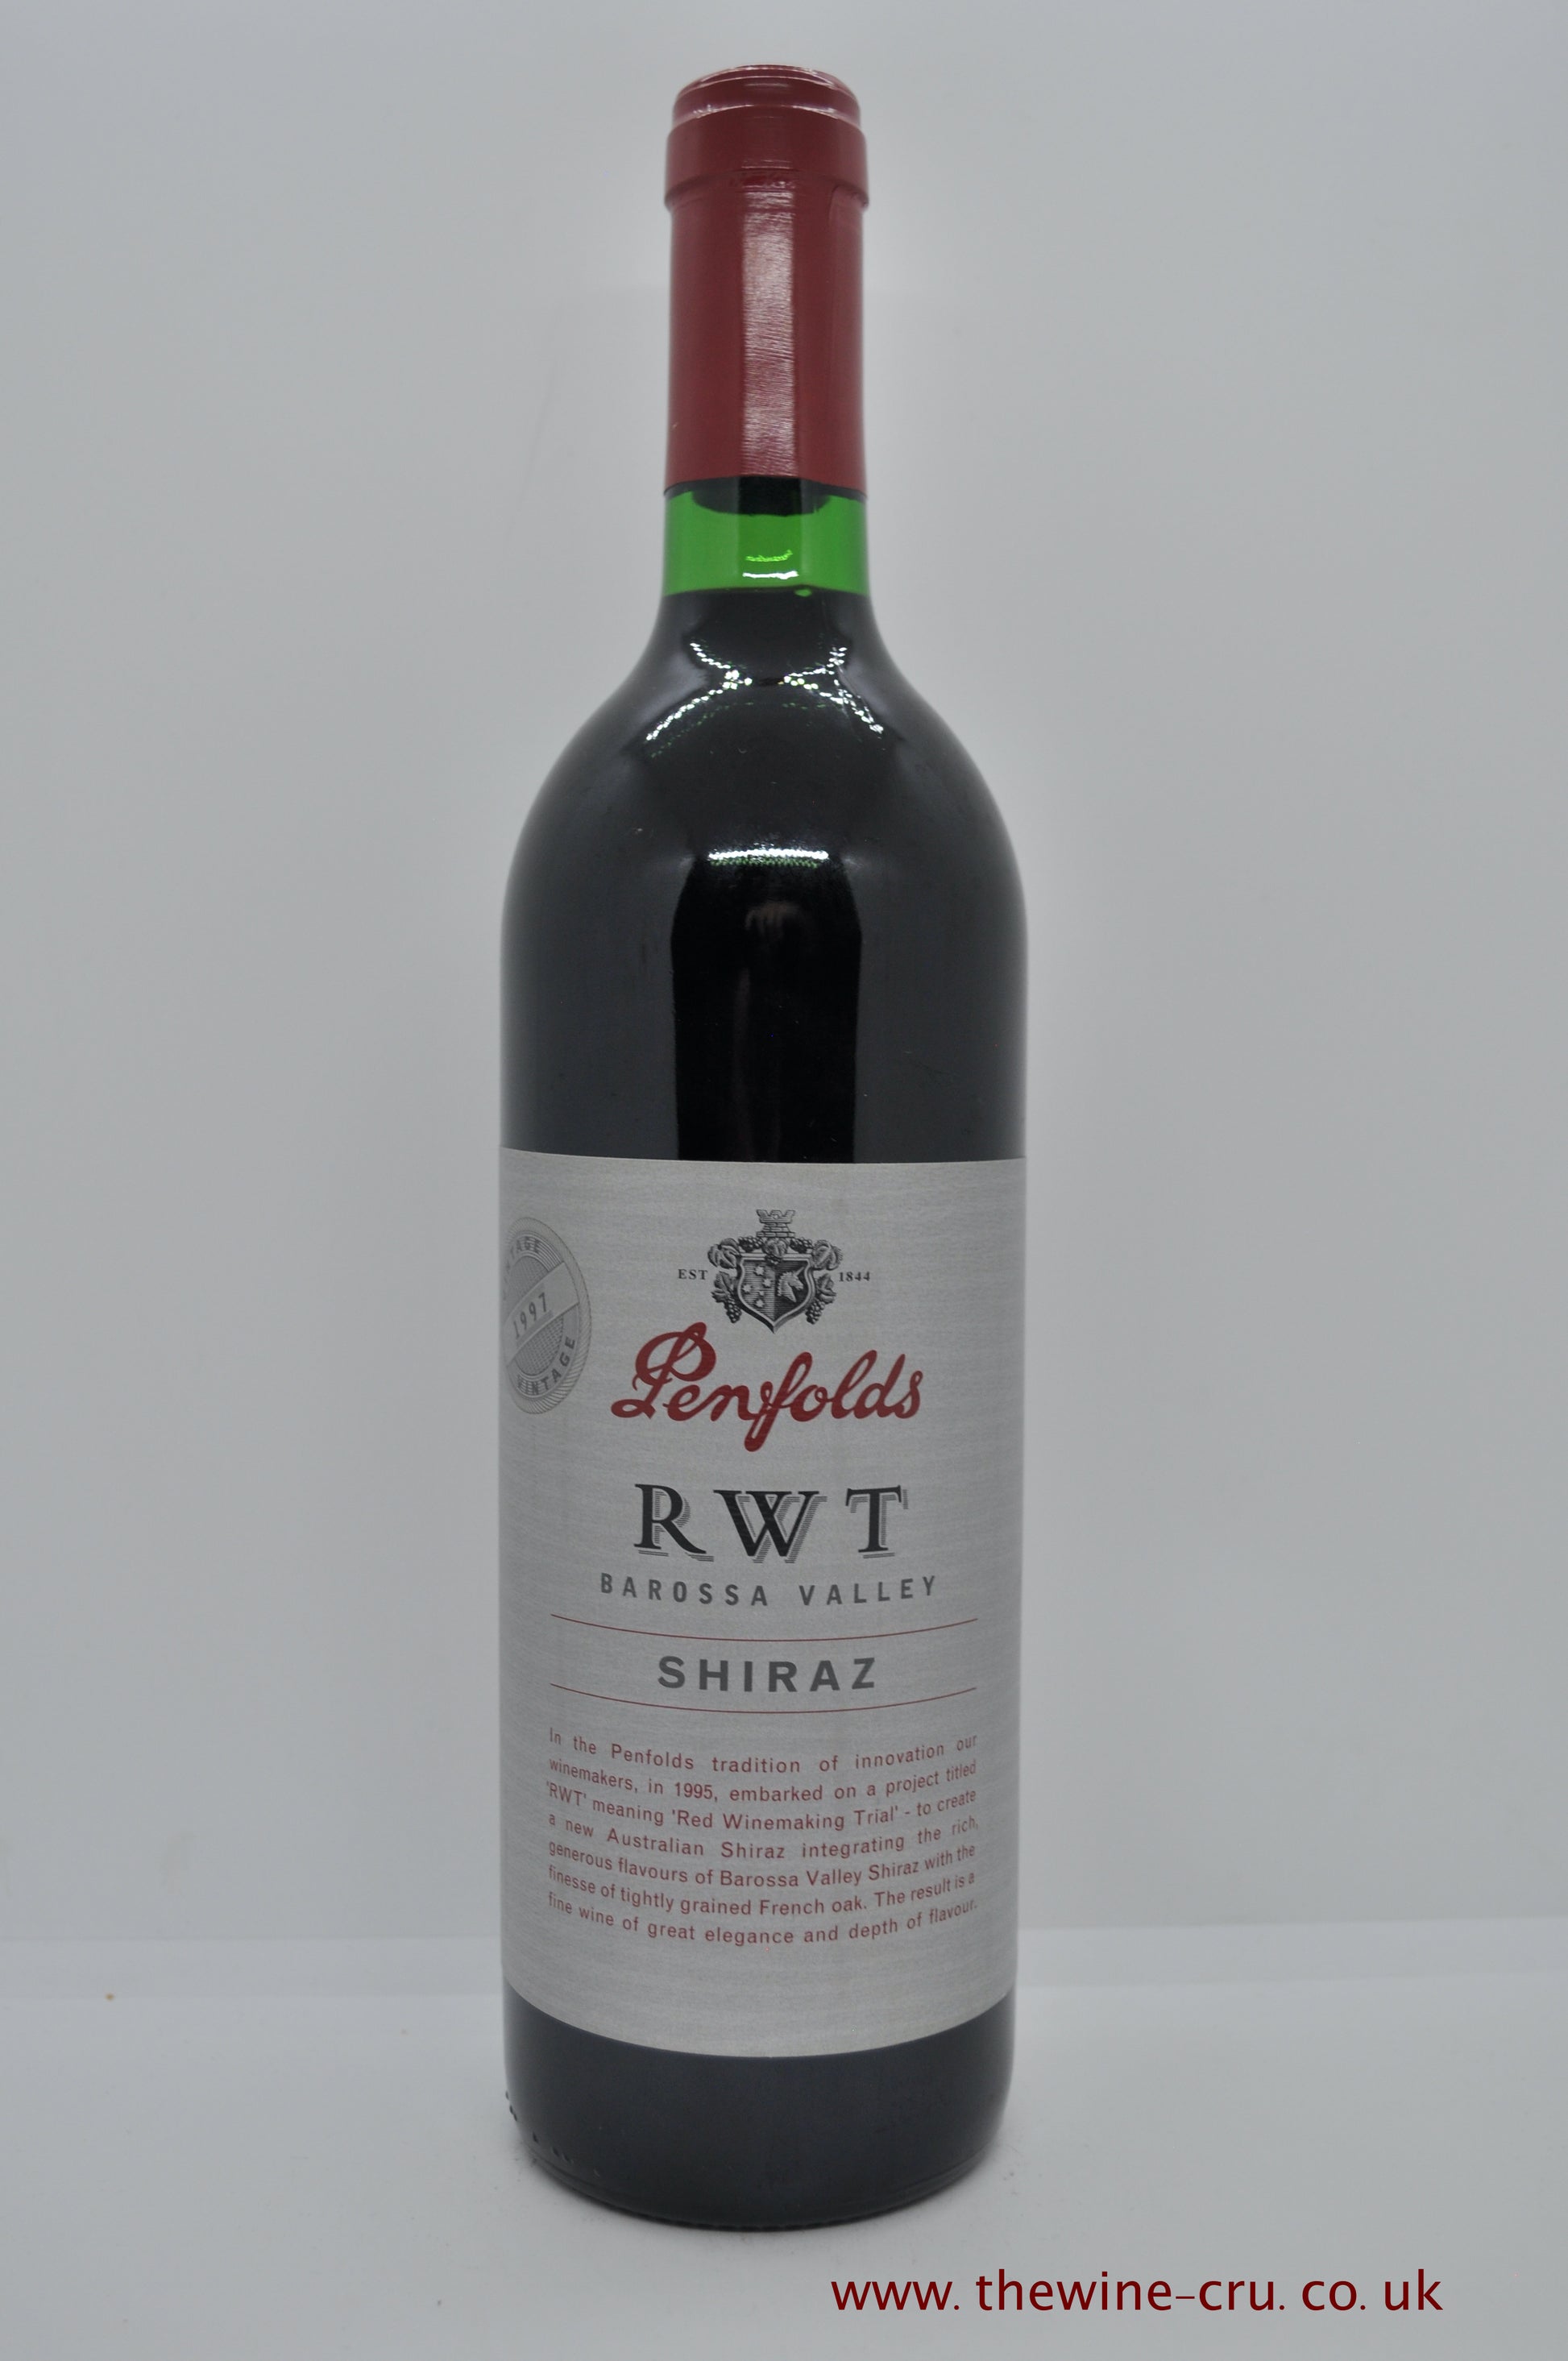 1997 vintage red wine. Penfolds RWT Bin 798 Shiraz 1997. Australia. Immediate delivery. Free local delivery. Gift wrapping available.